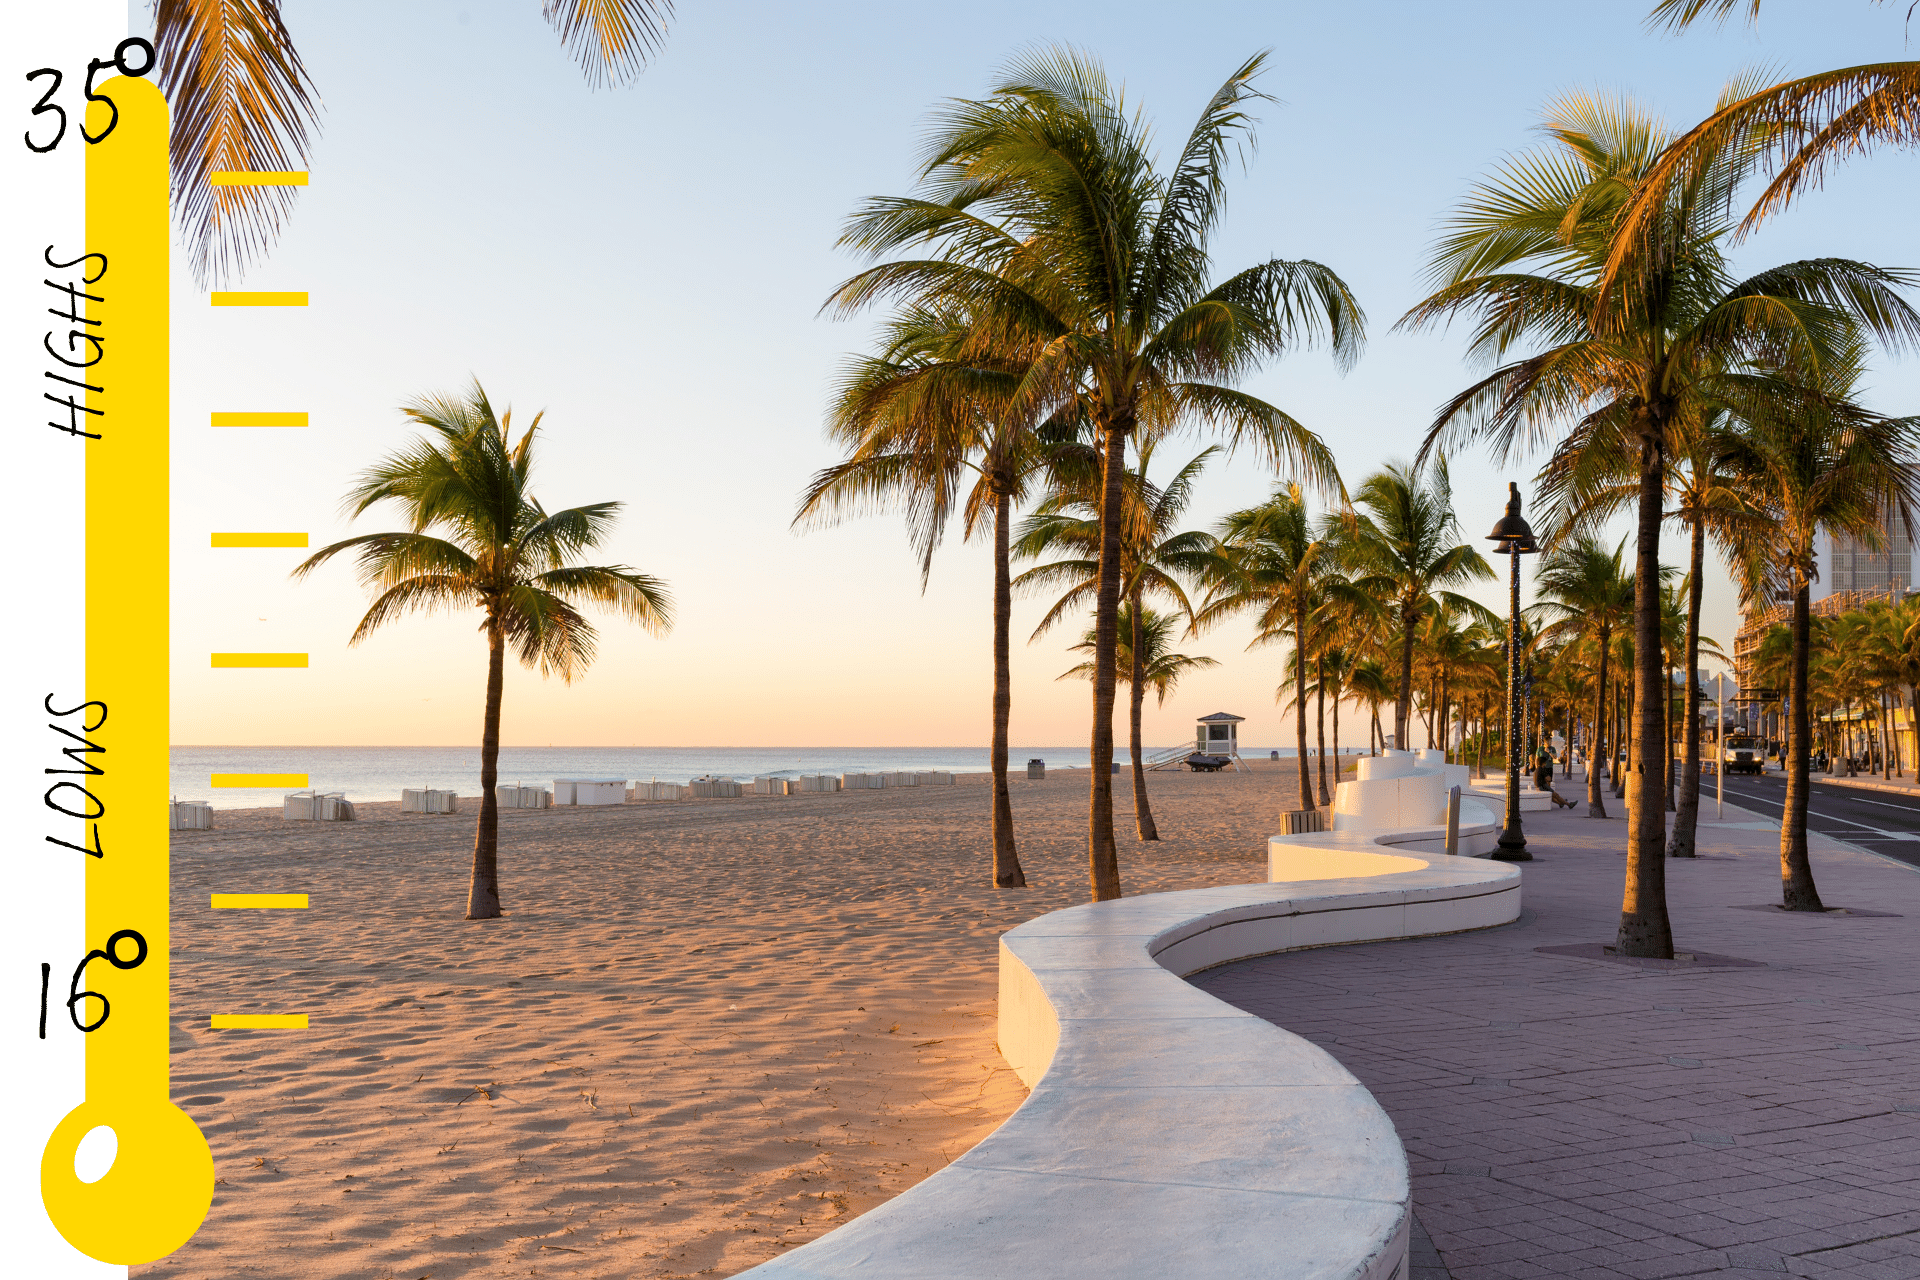 What's the weather like in Florida? Image shows a sandy beach at sunset lined with palm trees and a promenade.